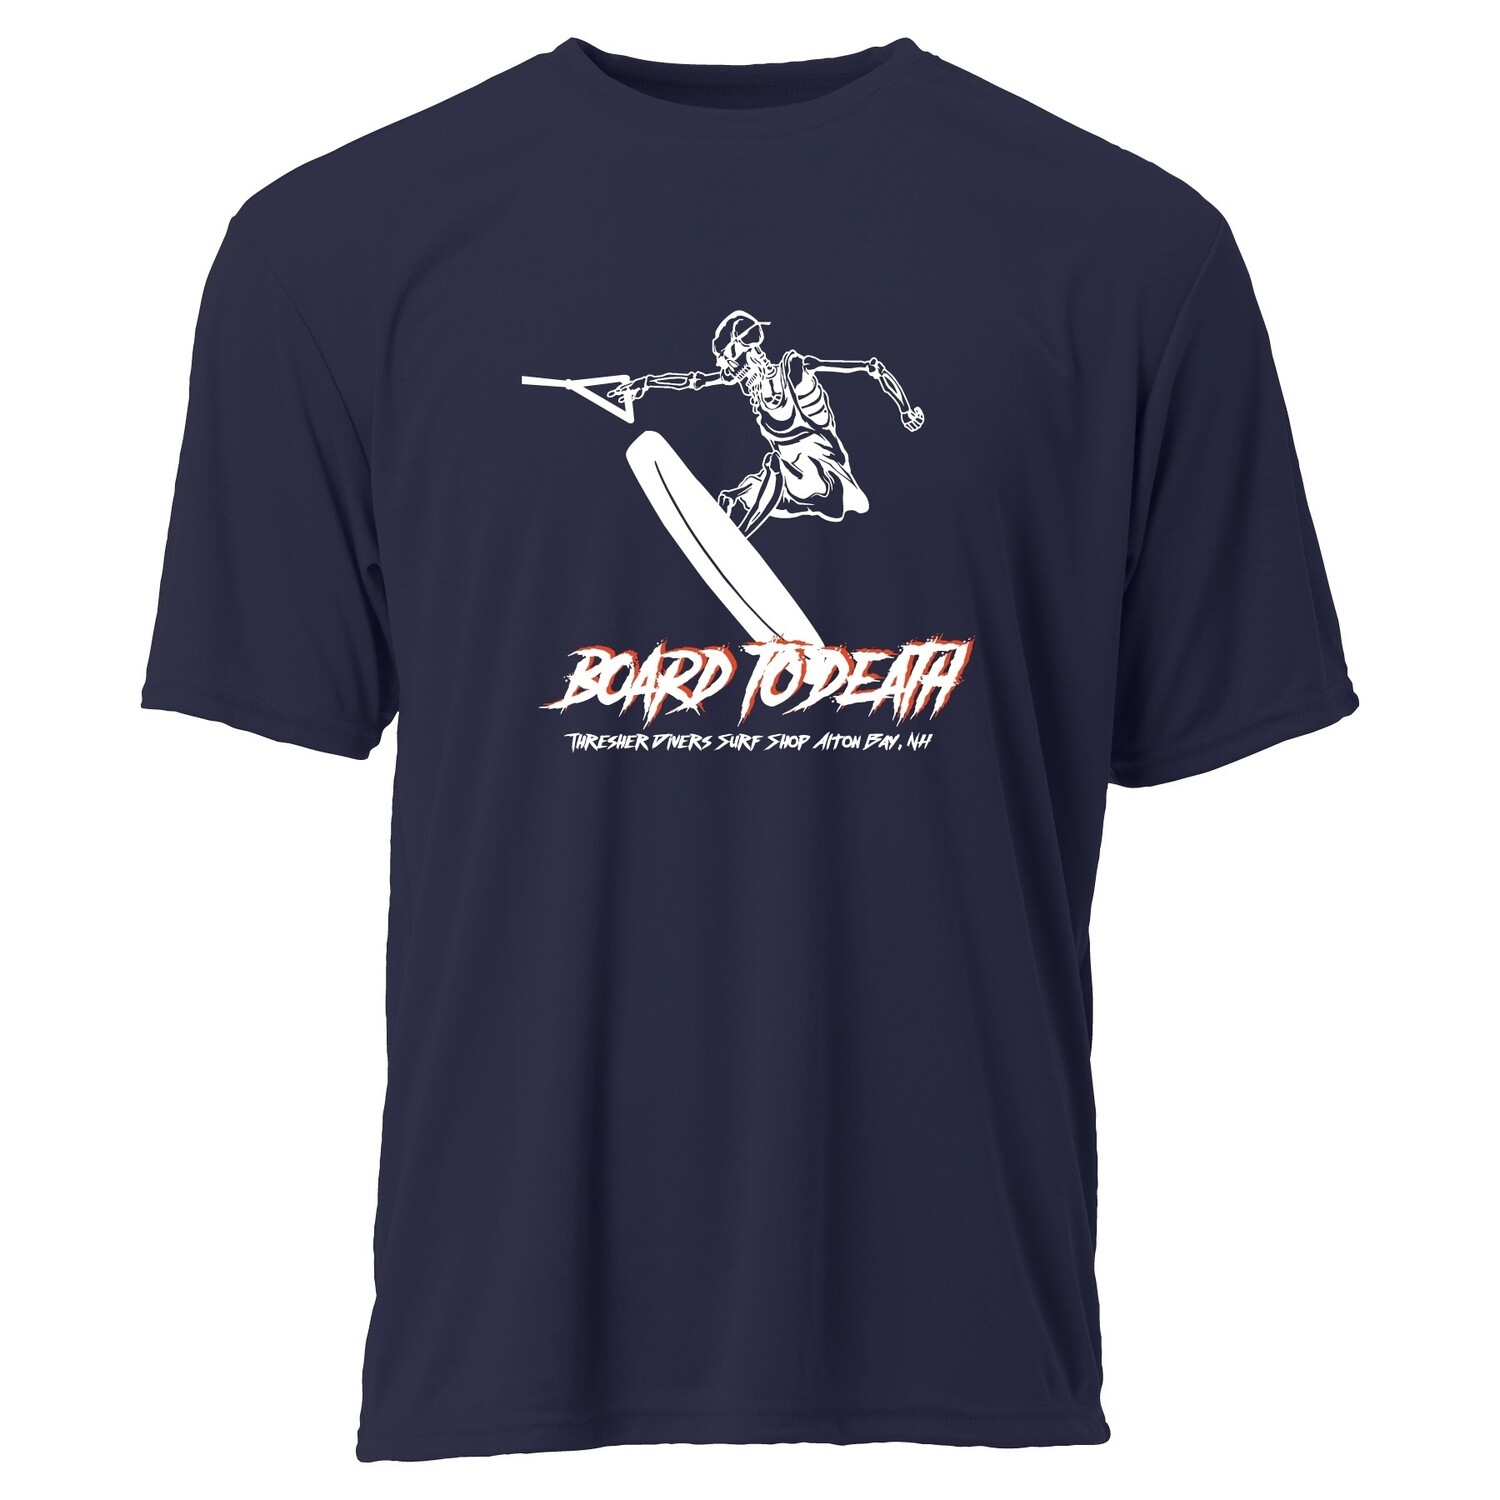 Youth Short Sleeve Performance Shirt, Size: SM, Colour: Navy, Design: Board to Death